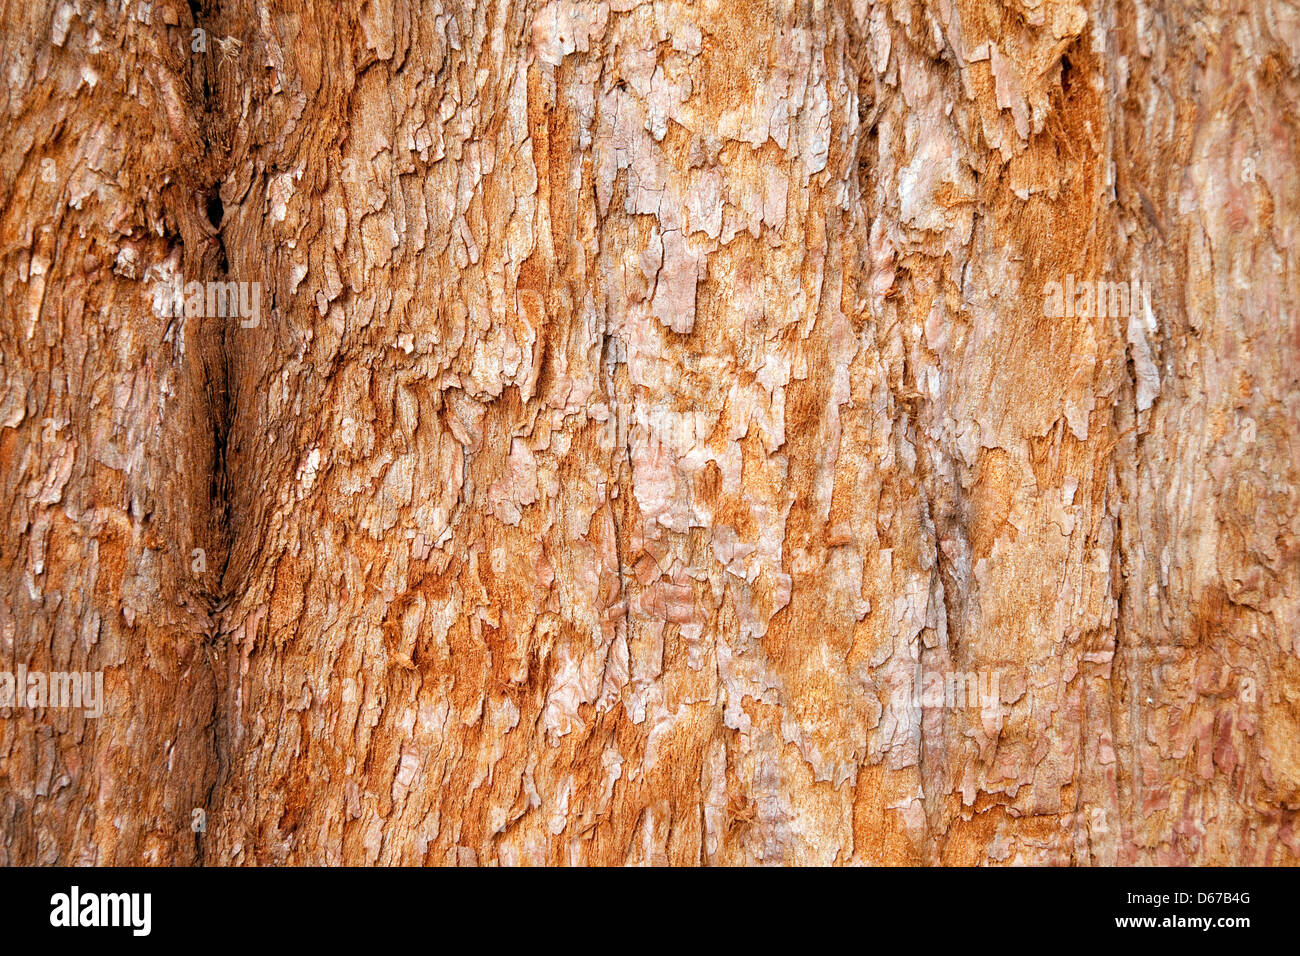 Close up of the trunk and bark of a Giant Sequoia sierra redwood tree, Sequoiadendron giganteum Stock Photo